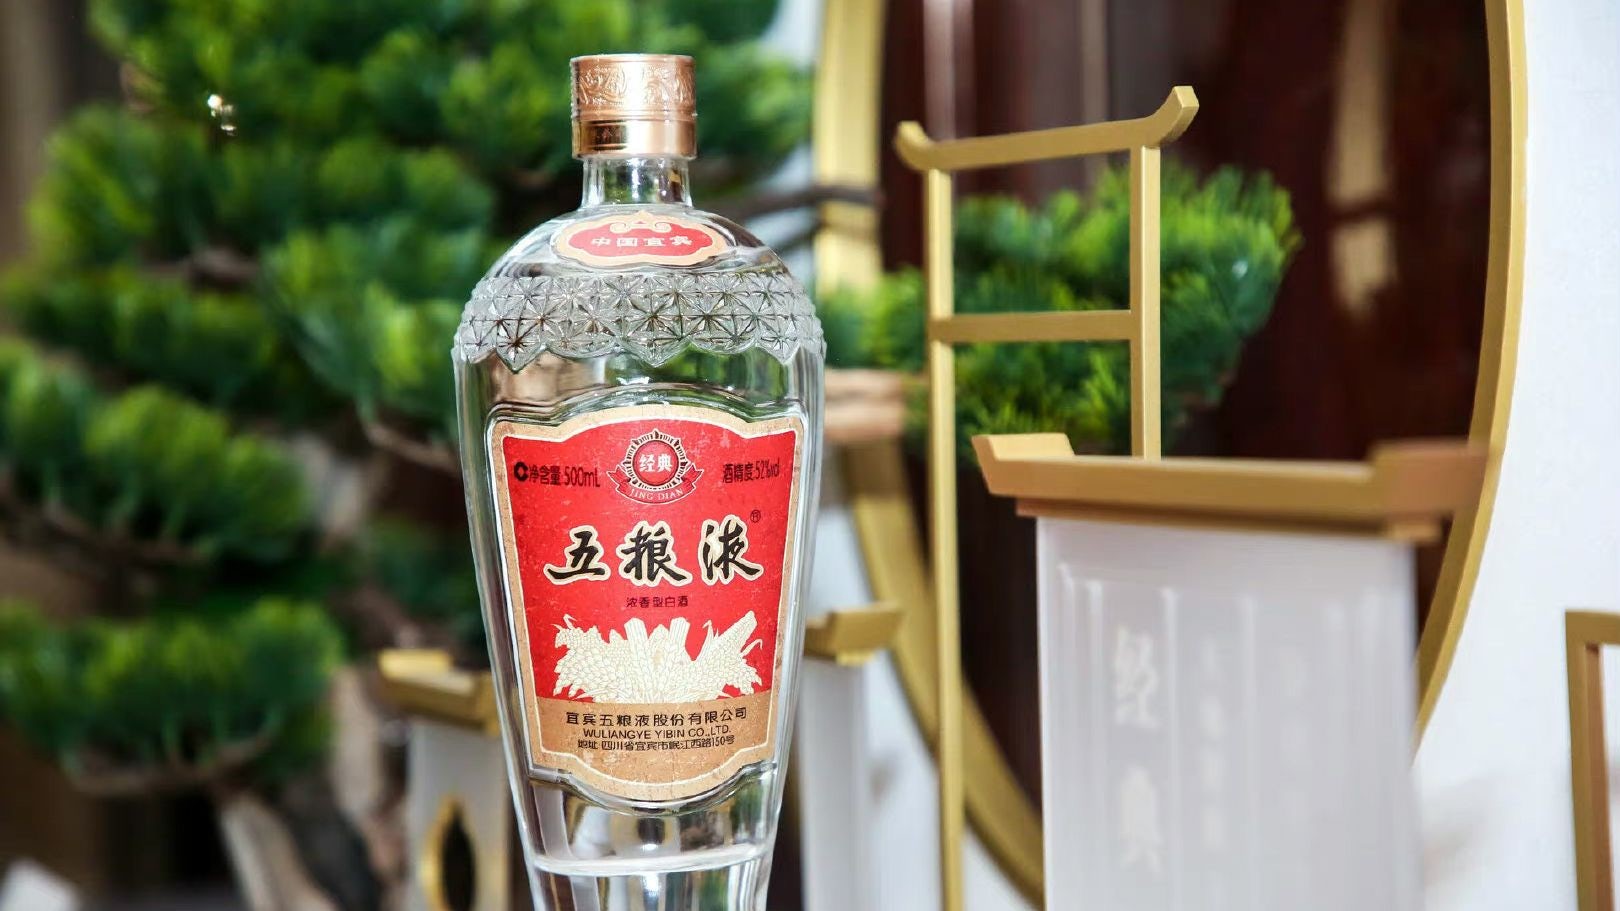 Six Of The World’s Most Valuable Spirits Brands Are Chinese